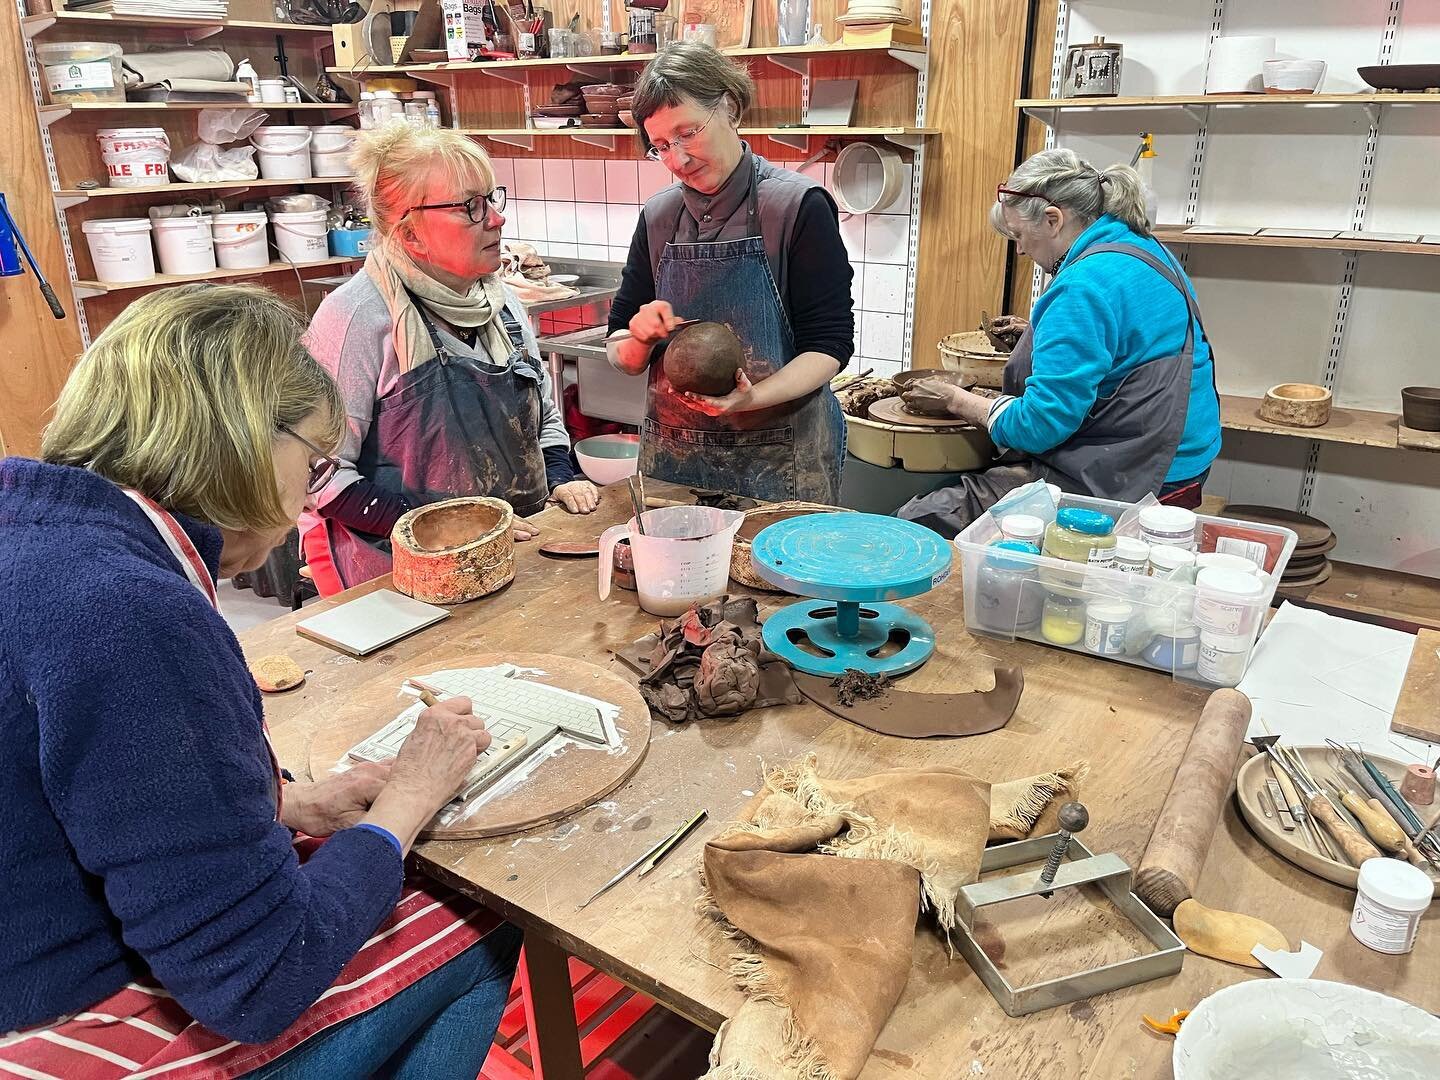 October workshops! We have 3 spaces available on a 4 week block of evening ceramic workshops. Come join in the fun with @evecampbelltextiles and @dreyworkshop in October.

4 week block (6.30pm-9pm) every Thursday in October.

&pound;140 for 4 worksho